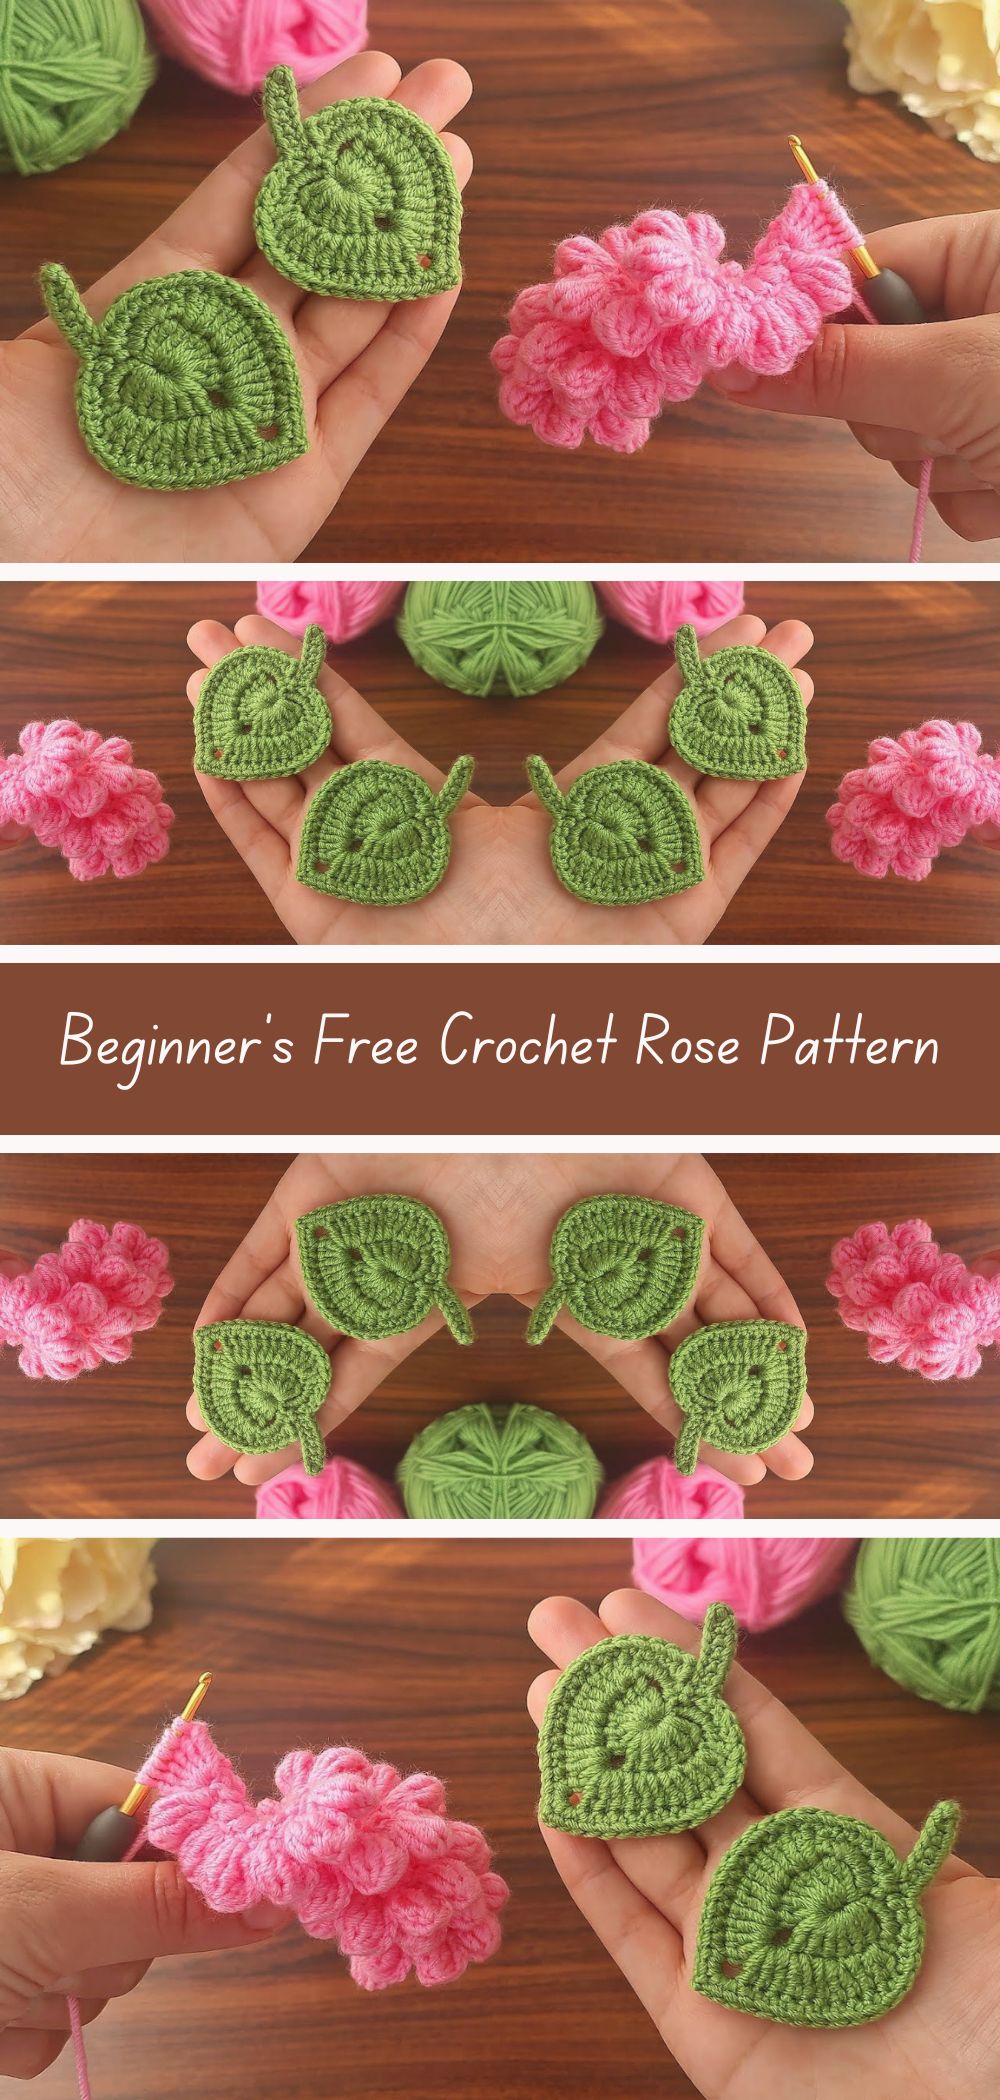 Step-by-Step Crochet Rose: Free Pattern - Learn to crochet a beautiful rose with this step-by-step free pattern